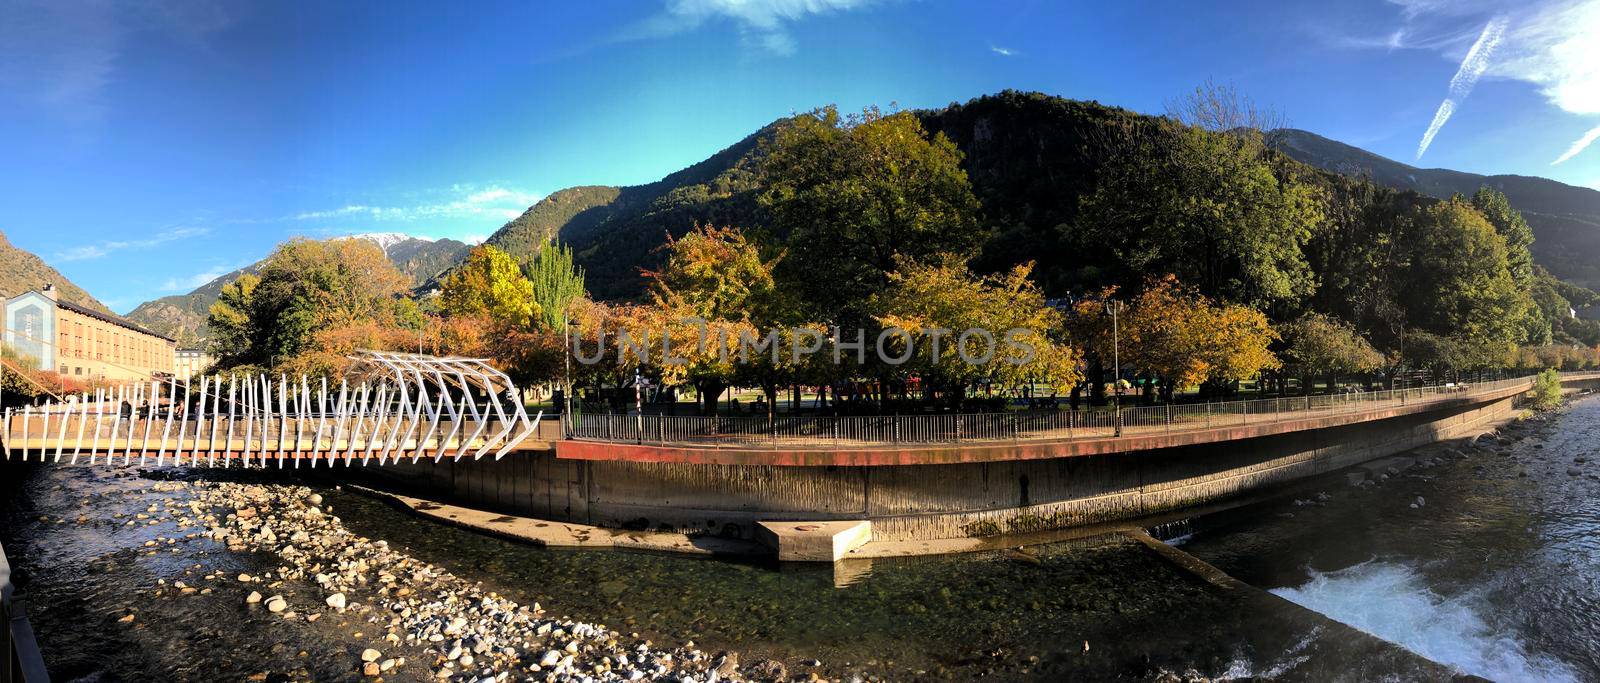 Panorama from autumn in Andorra la Vella  by traveltelly